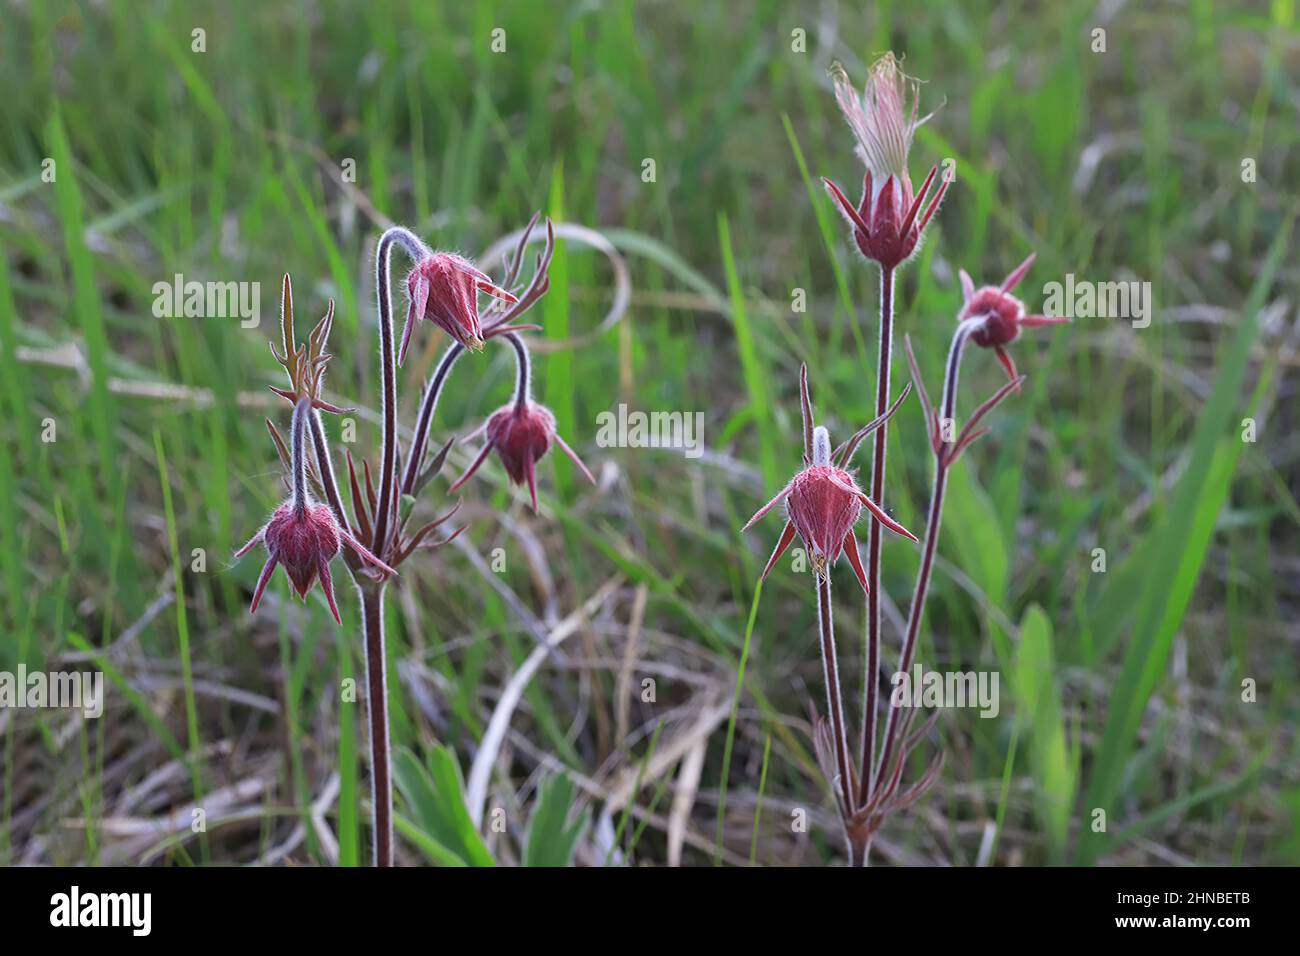 Buds of the Prairie Smoke Wildflower getting ready to flower at Wild River State Park, Chisago Co., MN, near Taylors Falls, Minnesota. Stock Photo